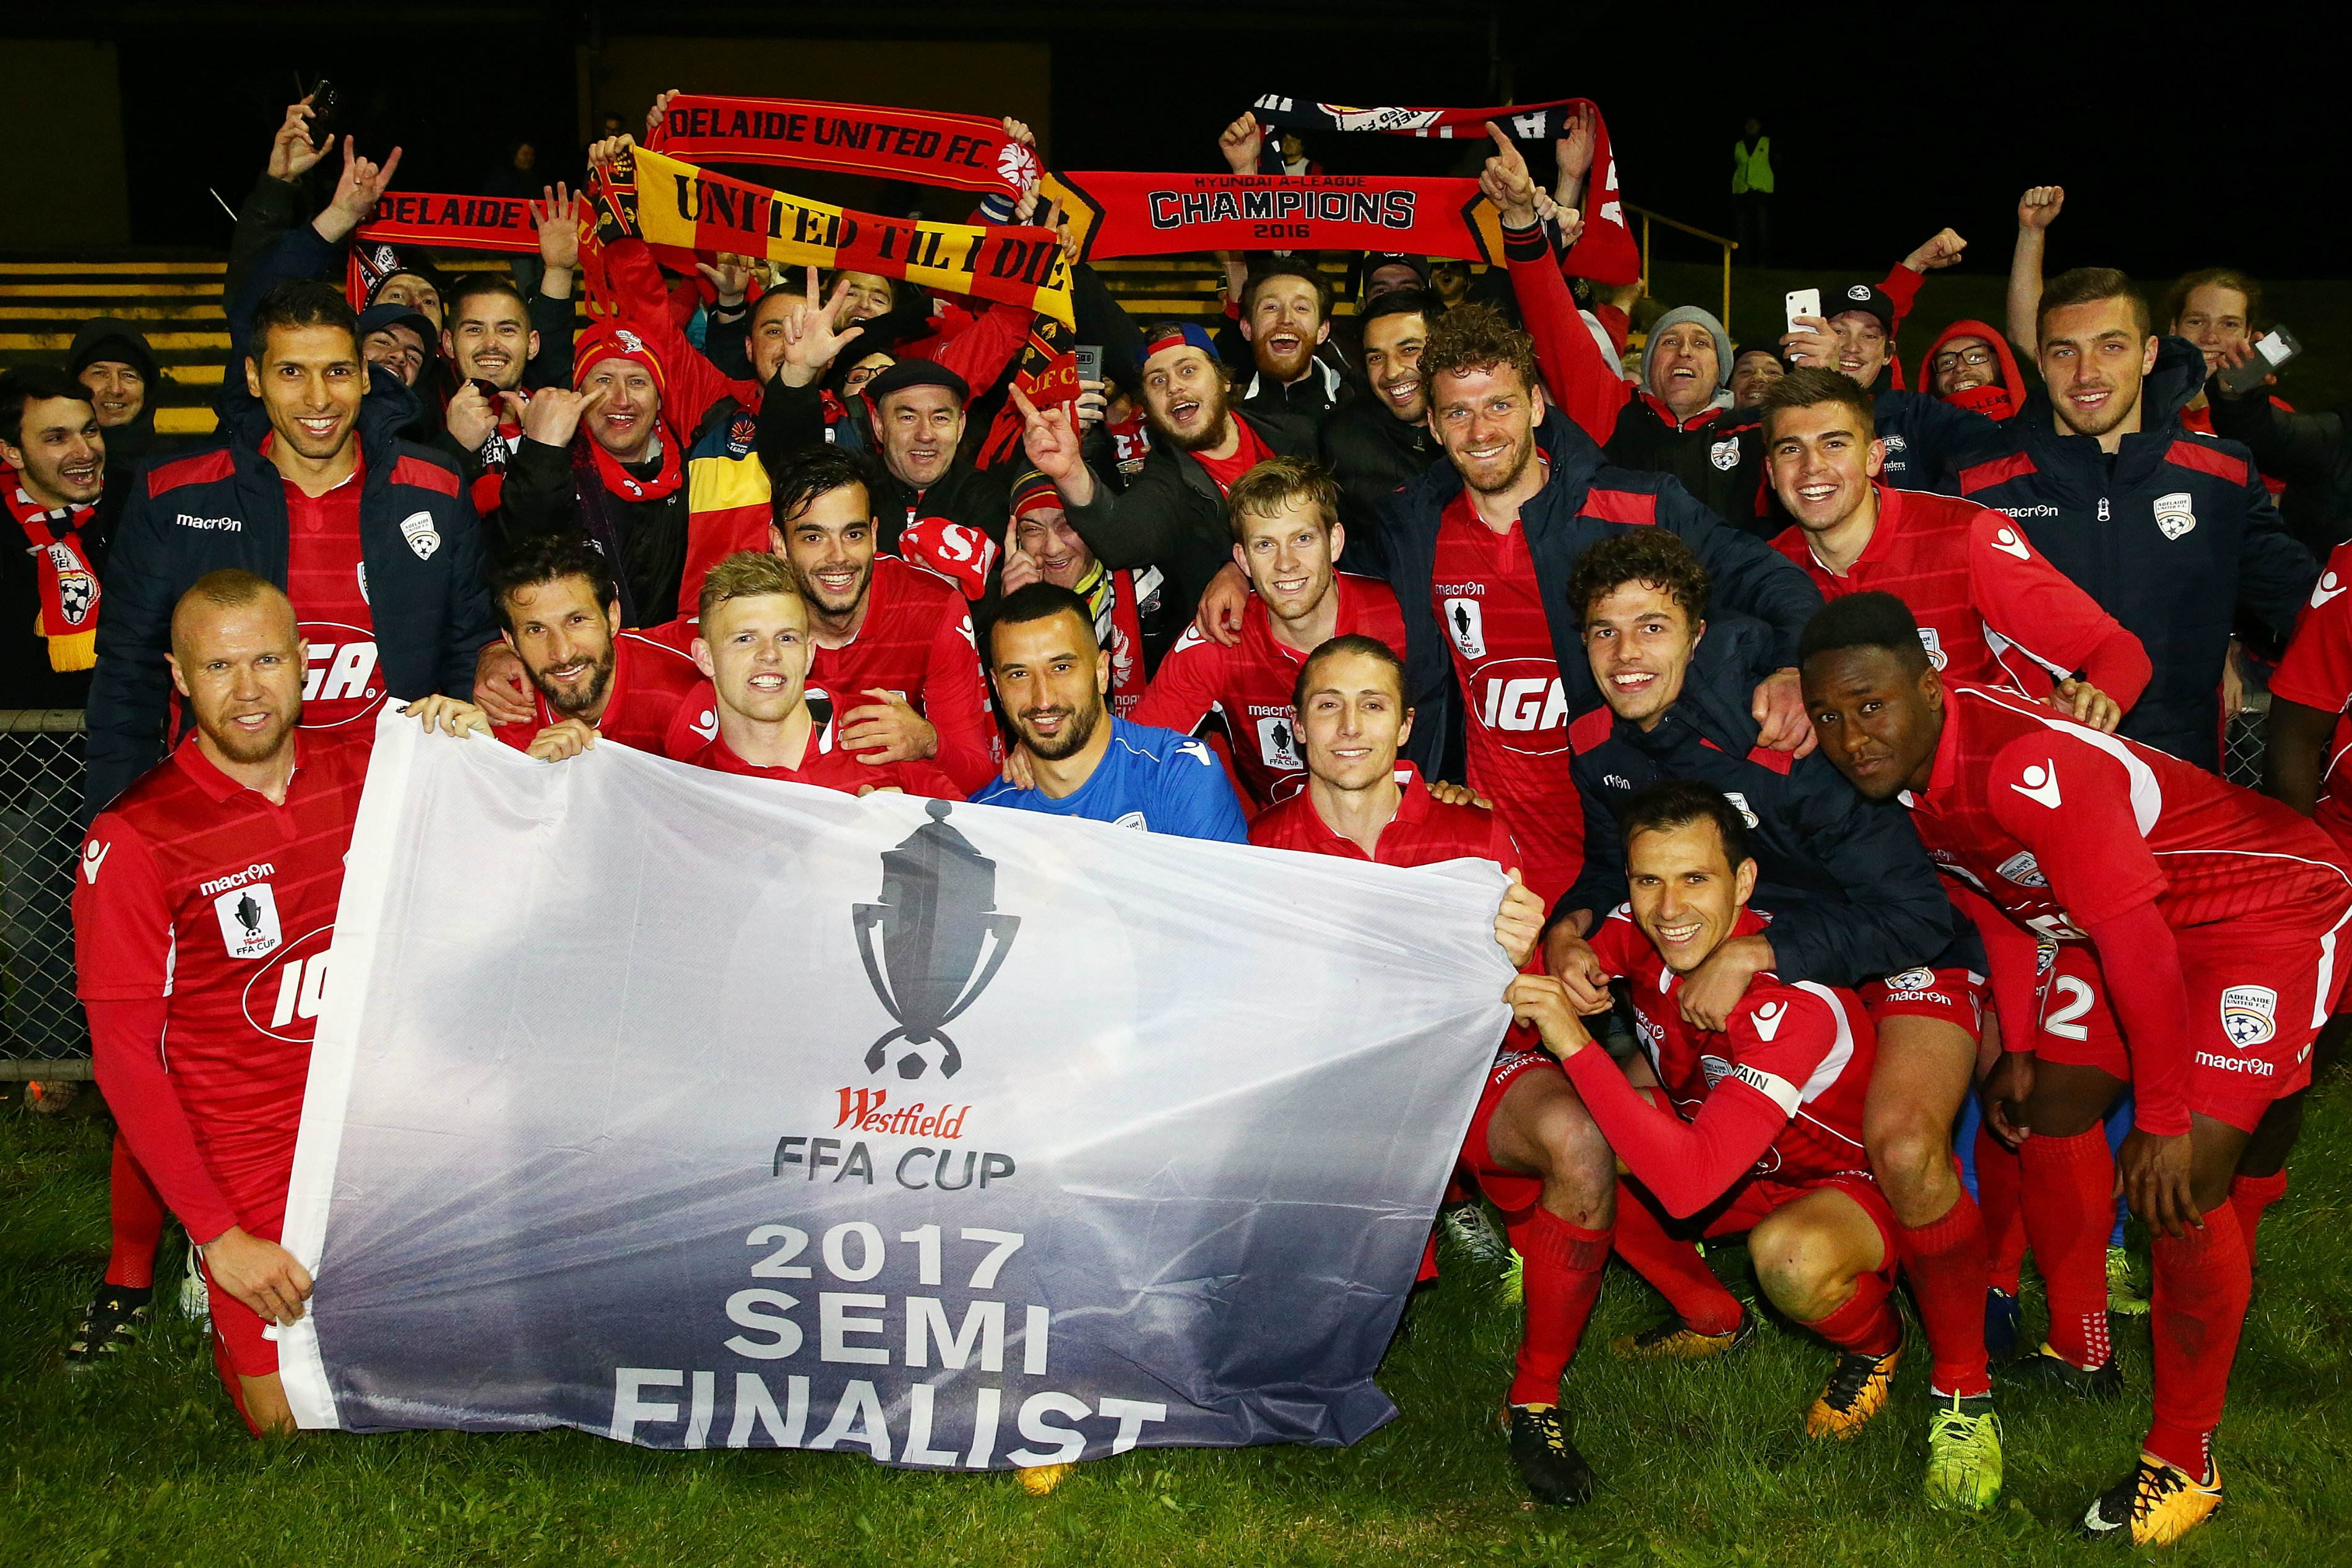 Adelaide United have impressed on their way to the FFA Cup semis.